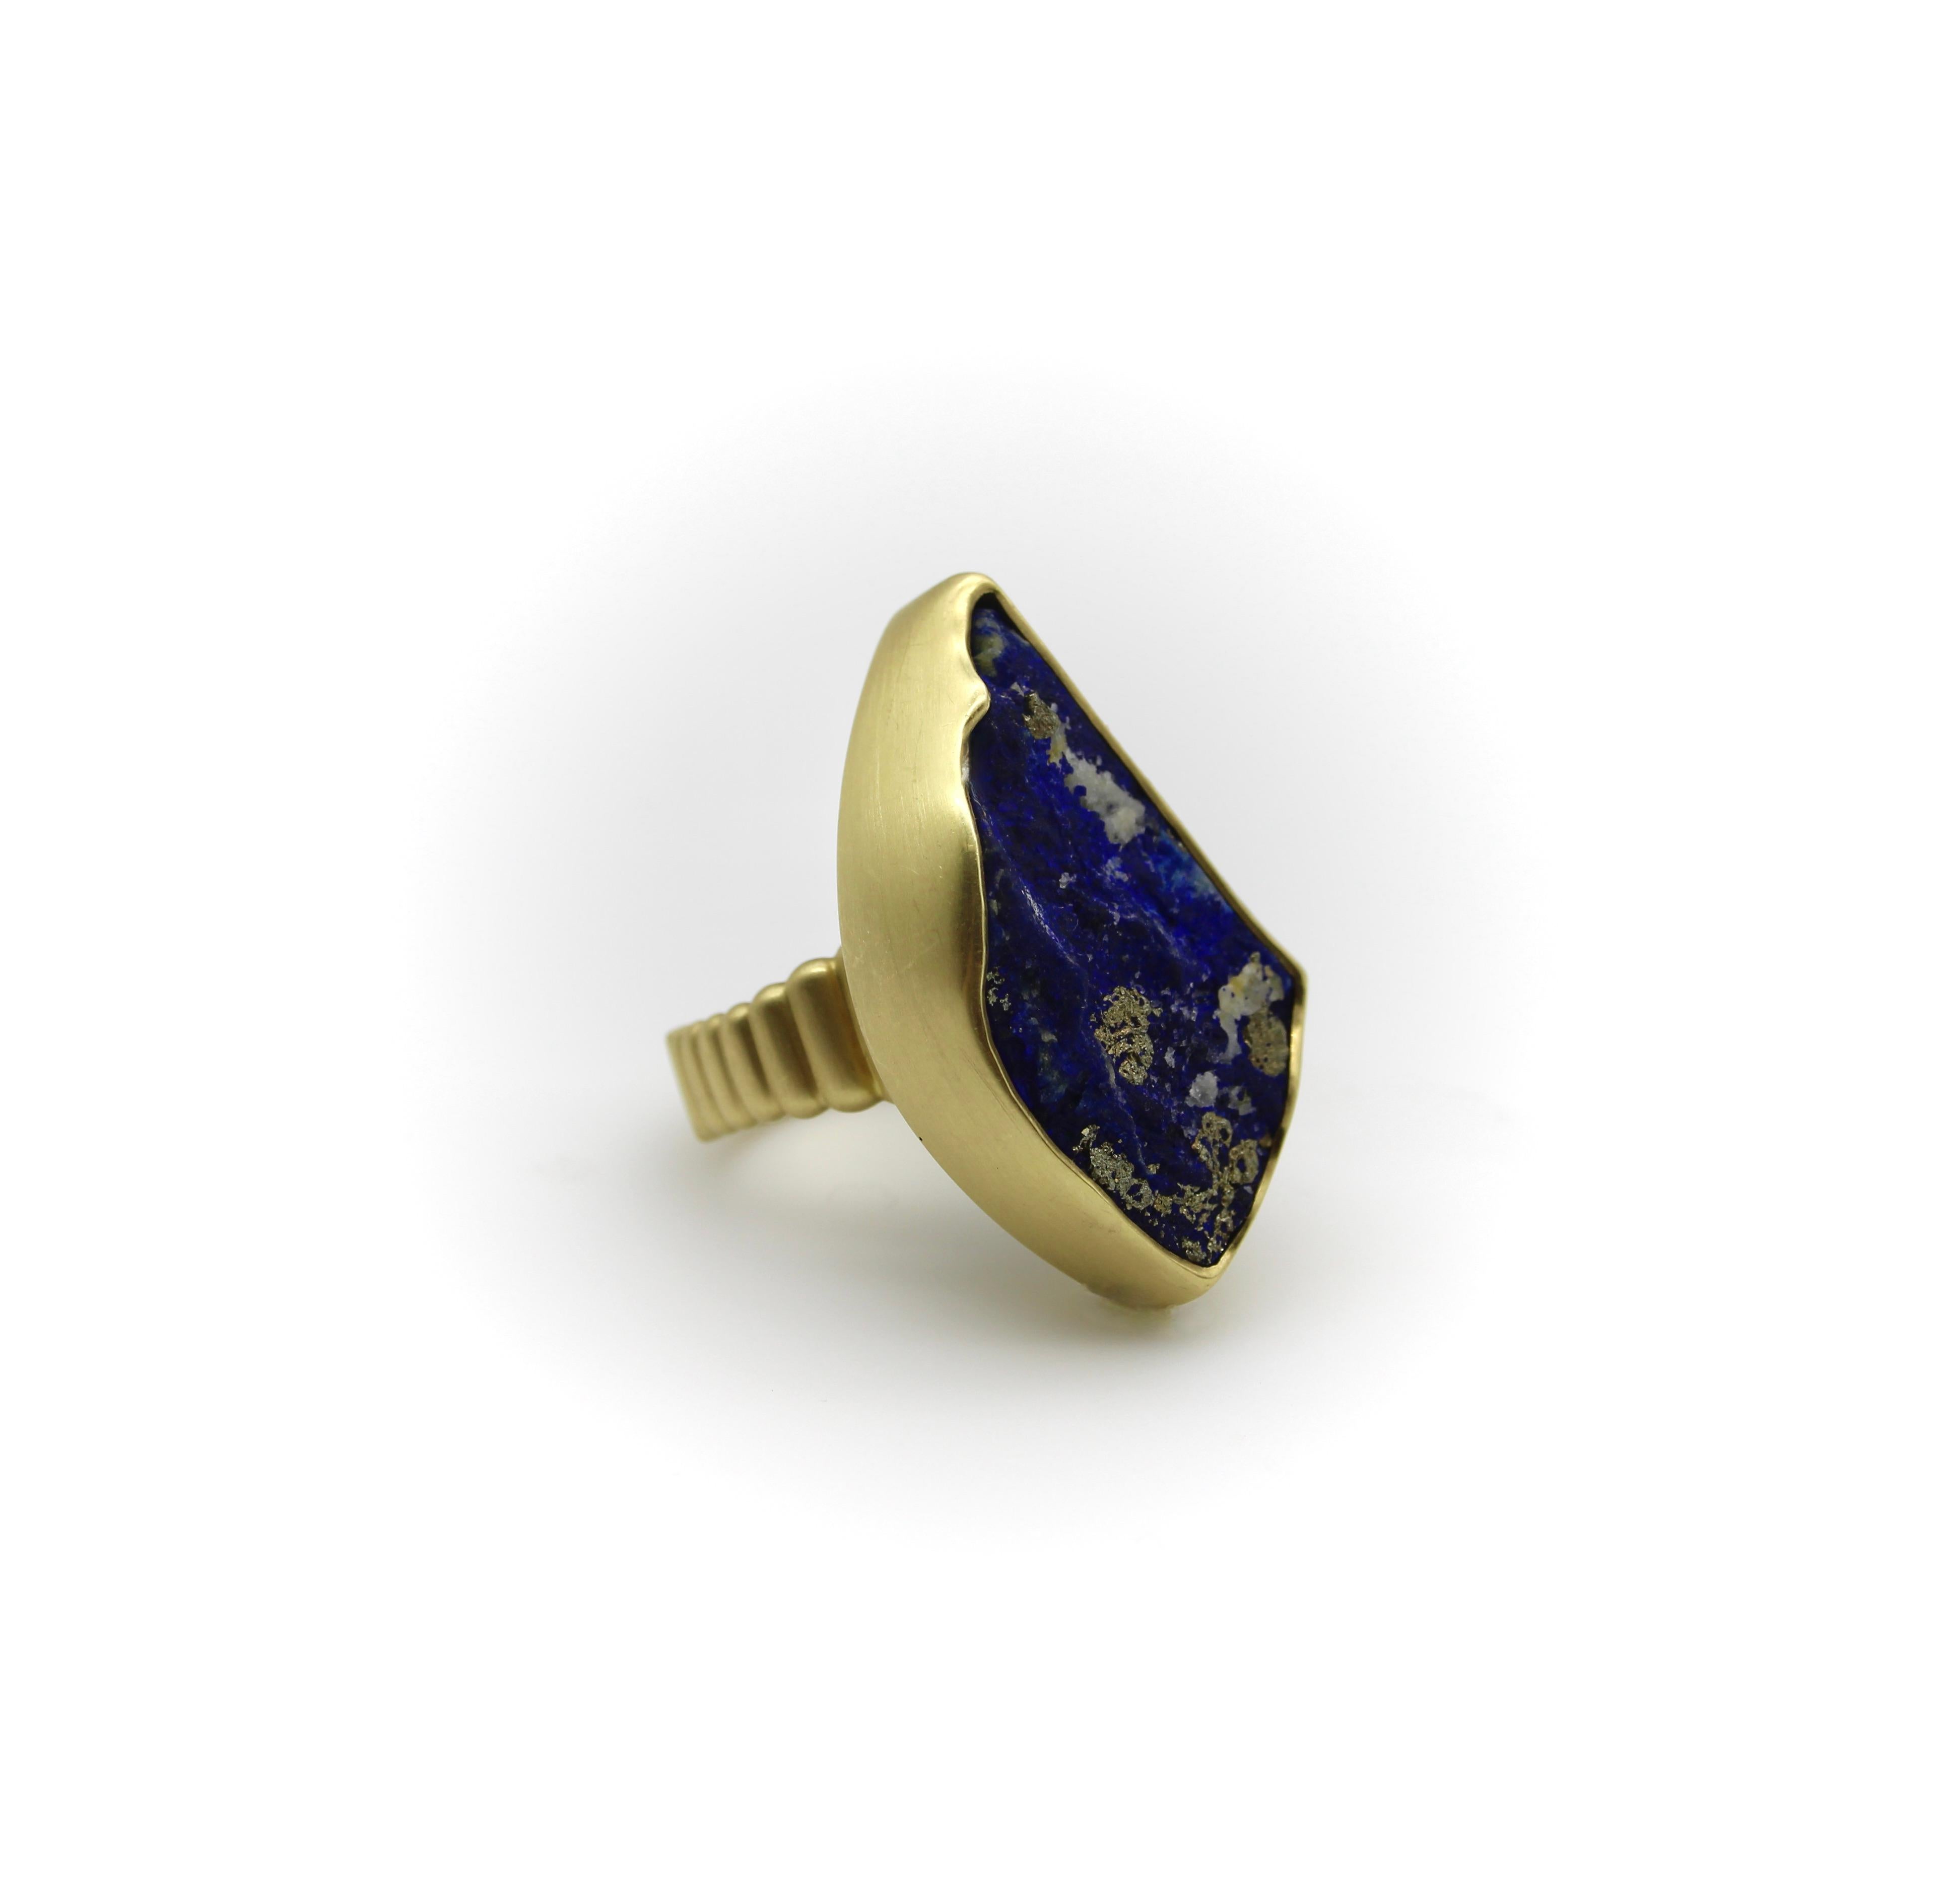 Vintage 18K Gold Freeform Artisan Lapis Lazuli Ring  In Good Condition For Sale In Venice, CA